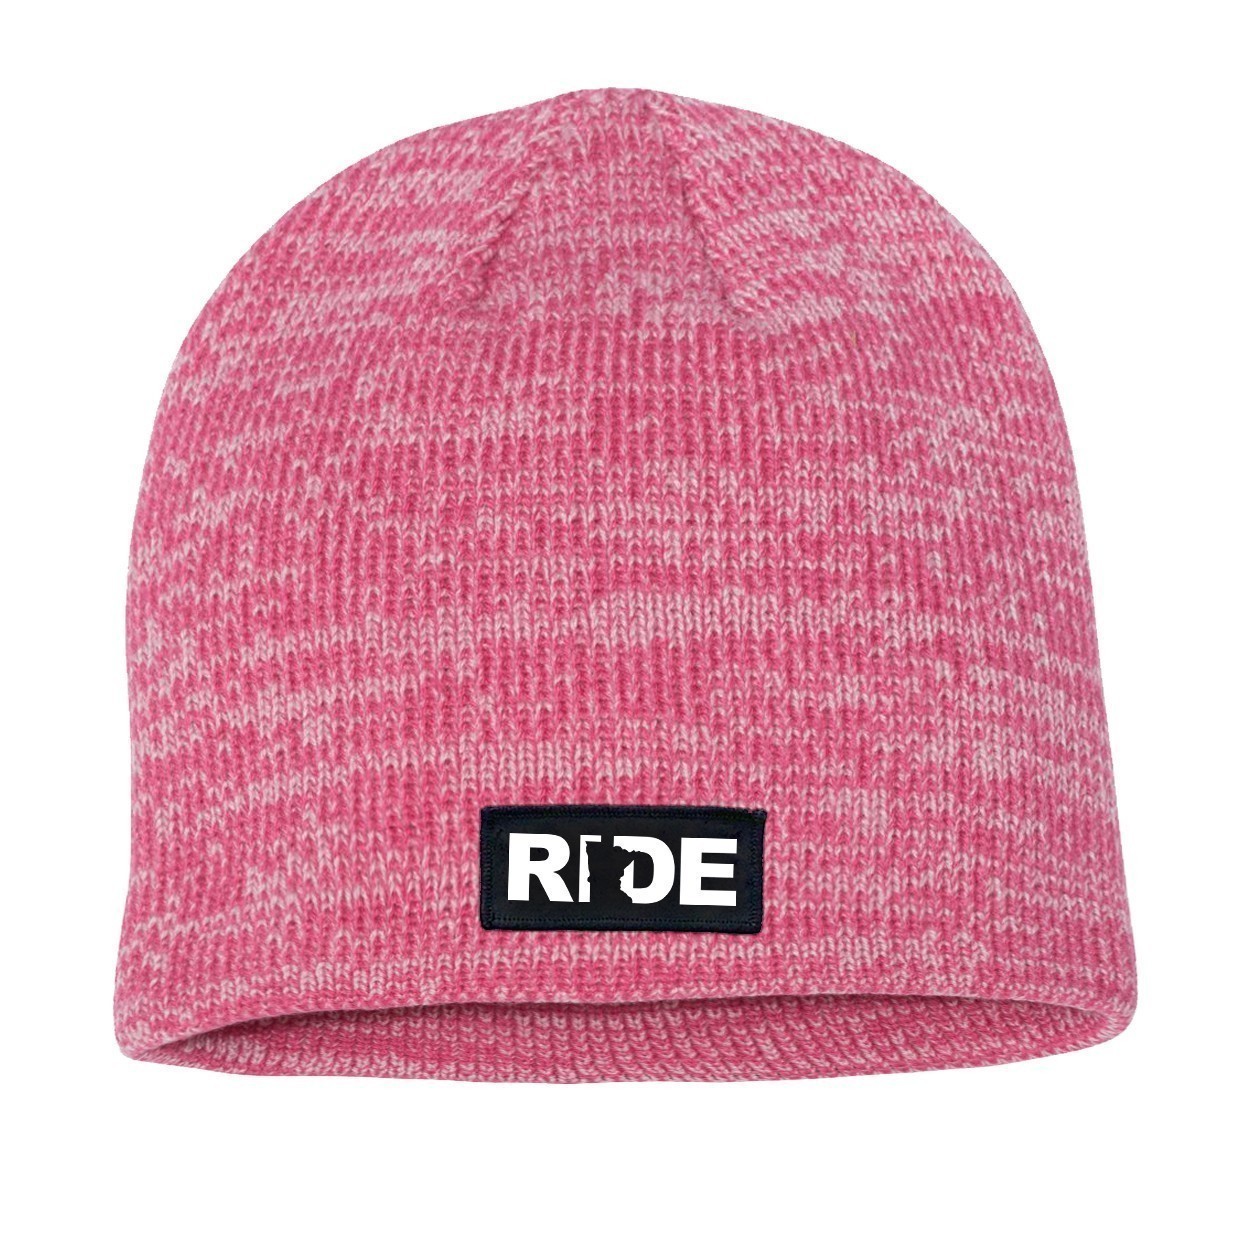 Ride Minnesota Night Out Woven Patch Skully Marled Knit Beanie Pink/Dark Pink (White Logo)